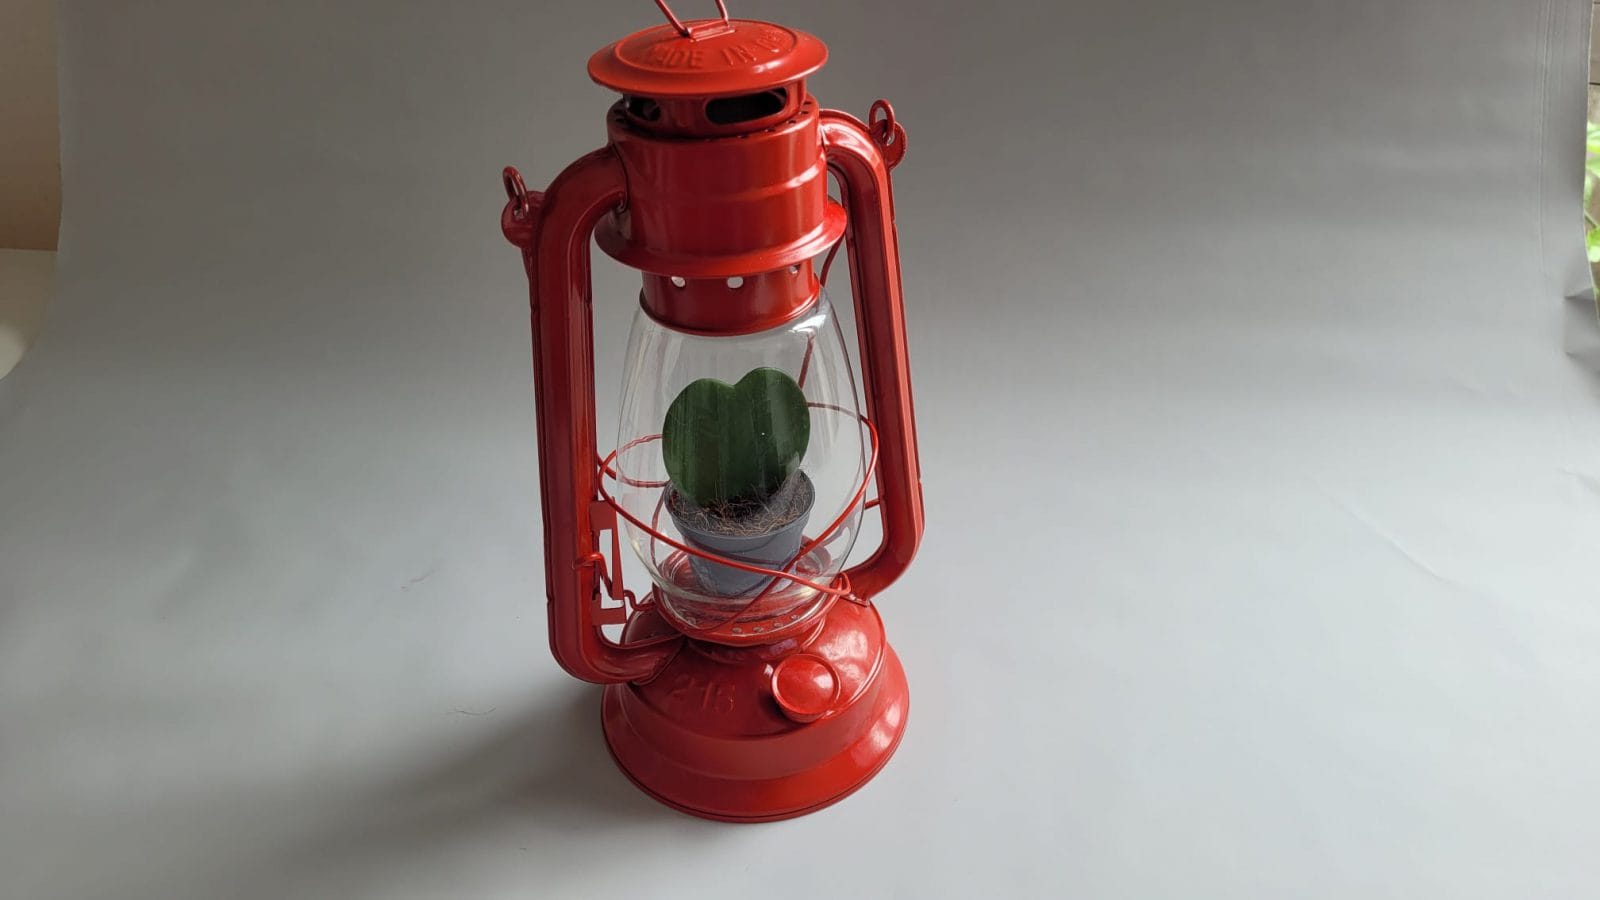 A plant in a lamp, lend to the exhibition by poet V. Leac, to accompany a short film from his countryside initiative, The Dendrology Park in Romanii de Jos.